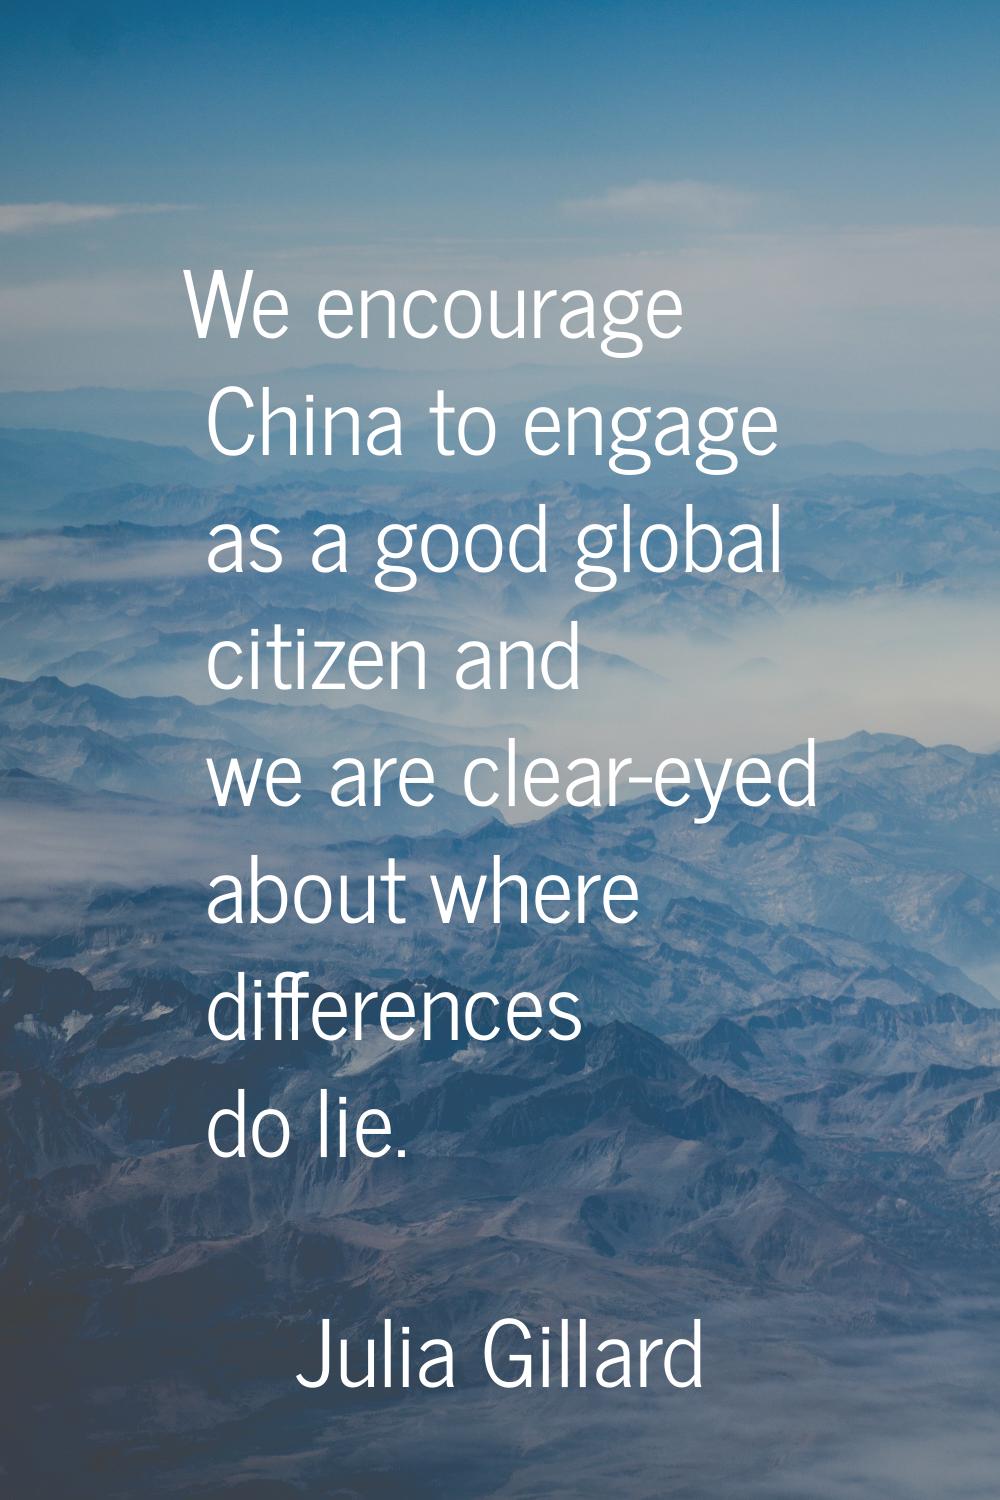 We encourage China to engage as a good global citizen and we are clear-eyed about where differences